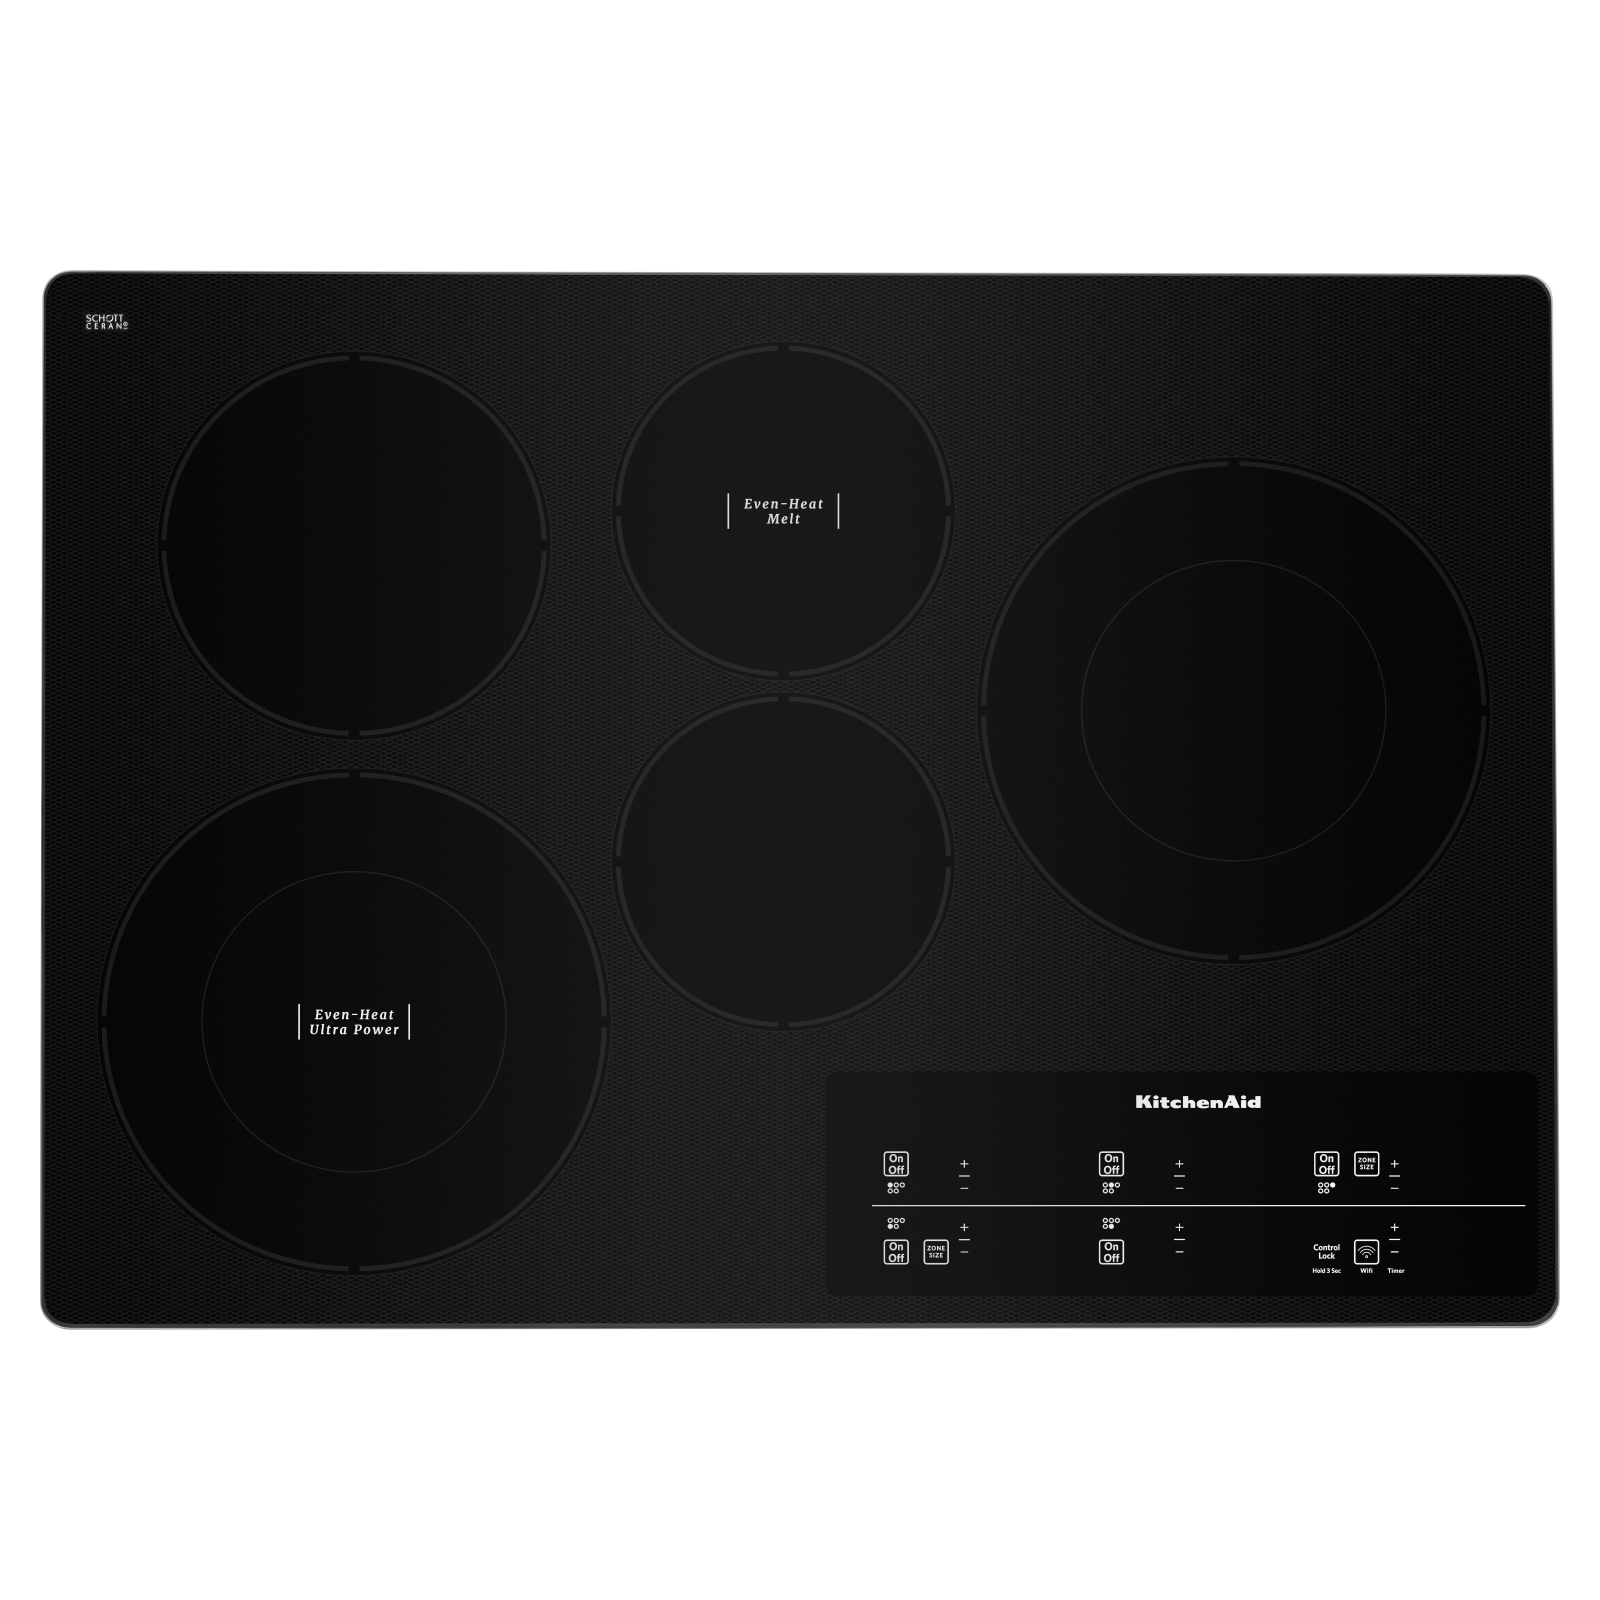 KitchenAid - 29 inch wide Electric Cooktop in Stainless - KCES950KSS